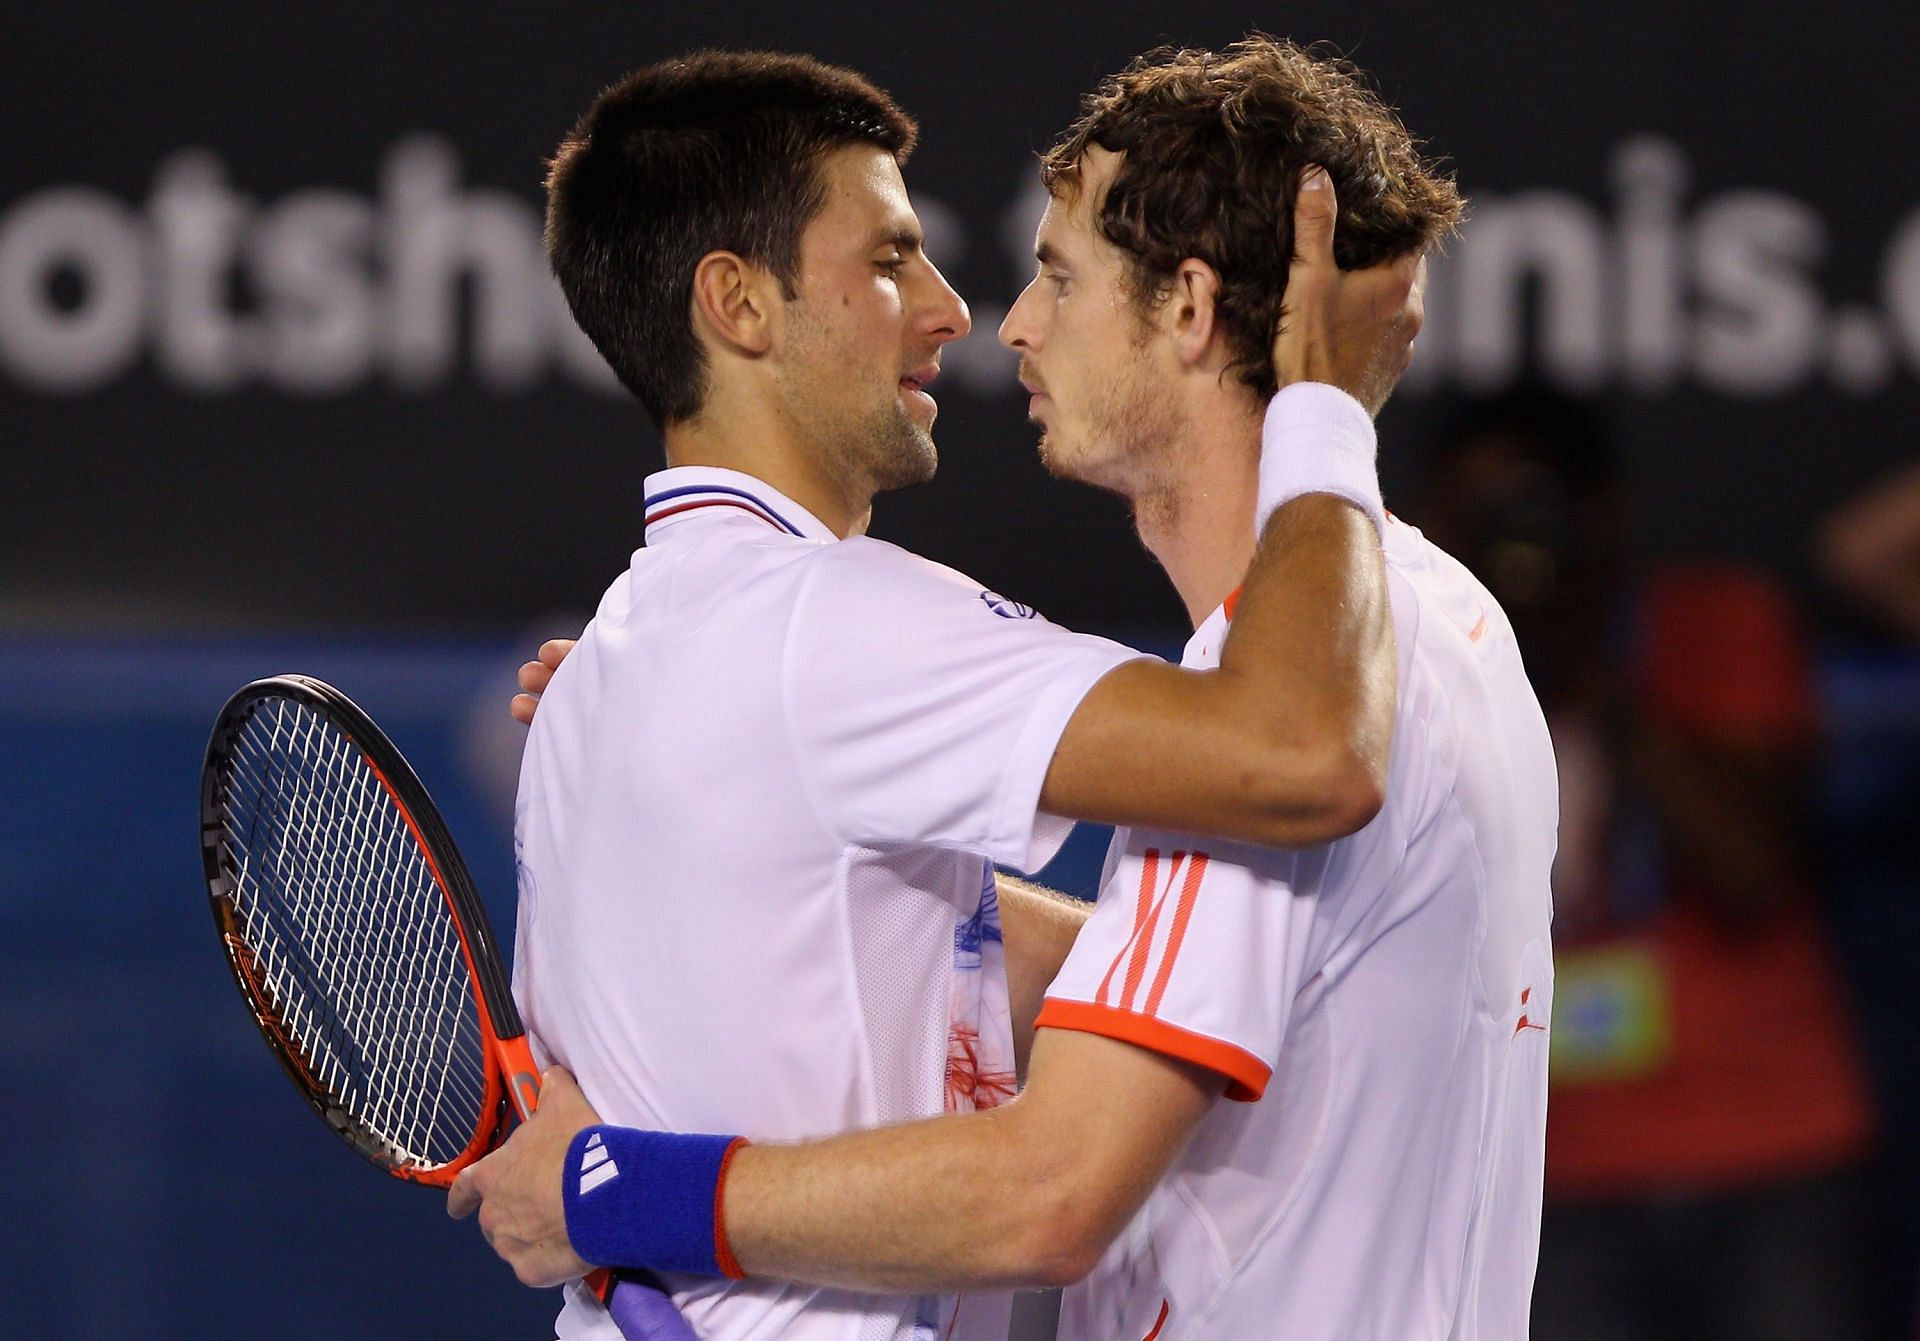 Djokovic and Murray pictured at the 2012 Australian Open